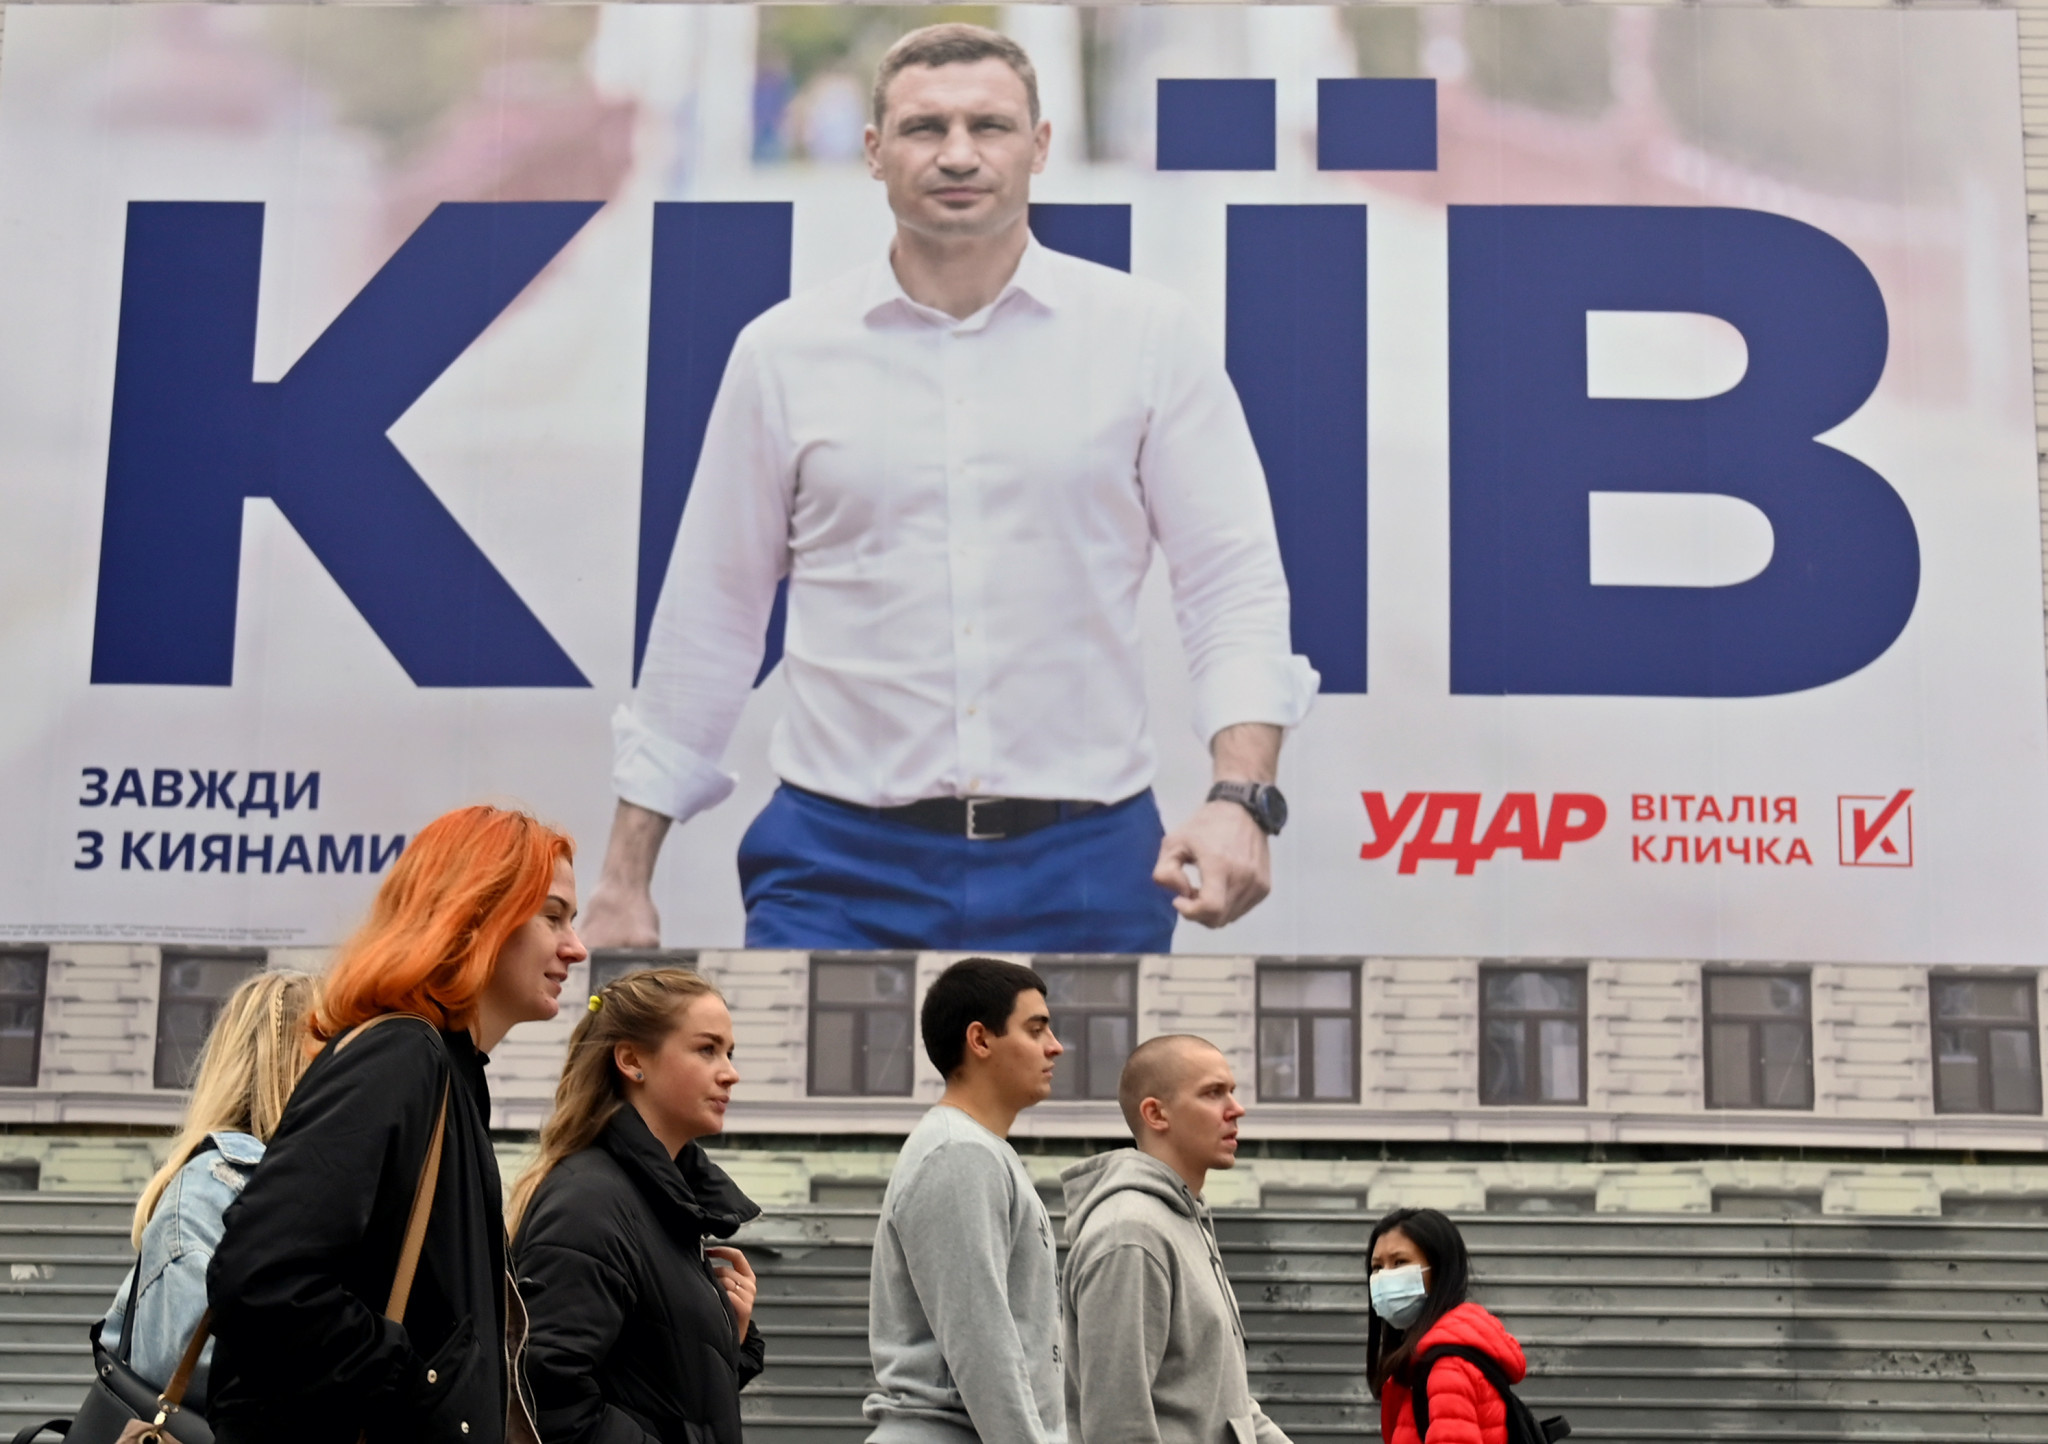 Former heavyweight boxing world champion Vitali Klitschko is now a political force to be reckoned with ©Getty Images